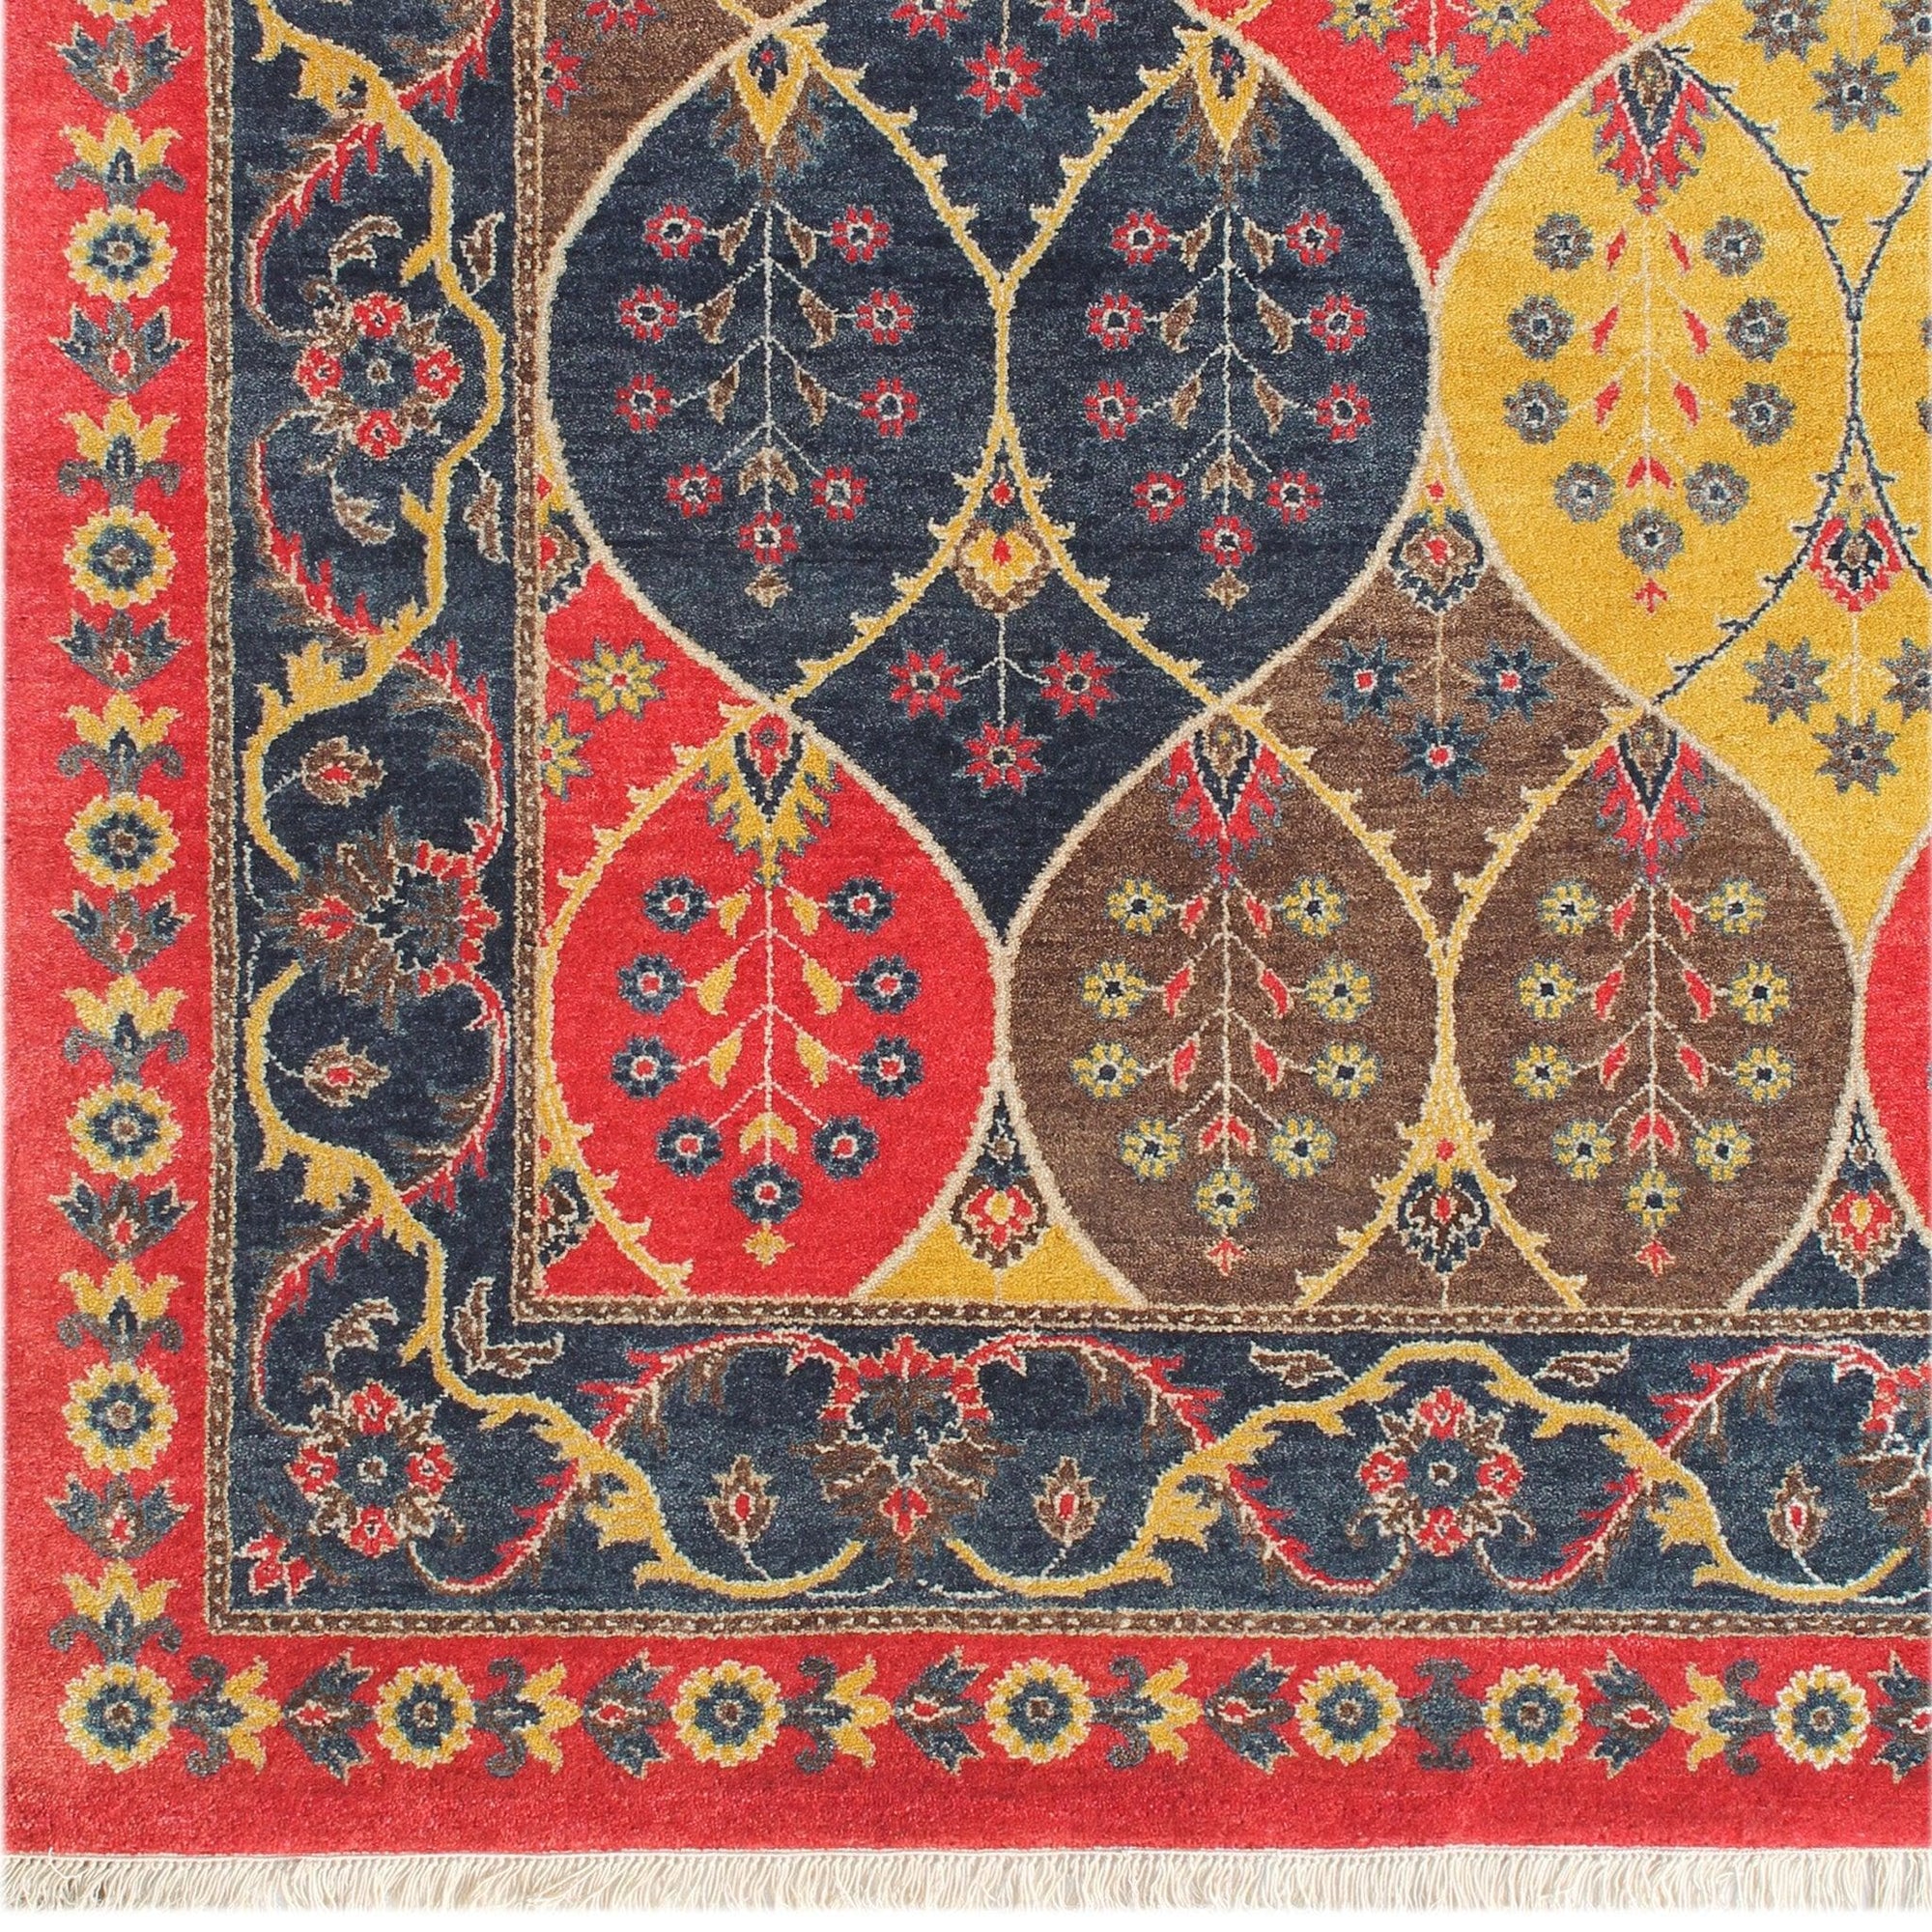 Fine Hand-knotted Wool Patch Weave Rug 170cm x 242cm